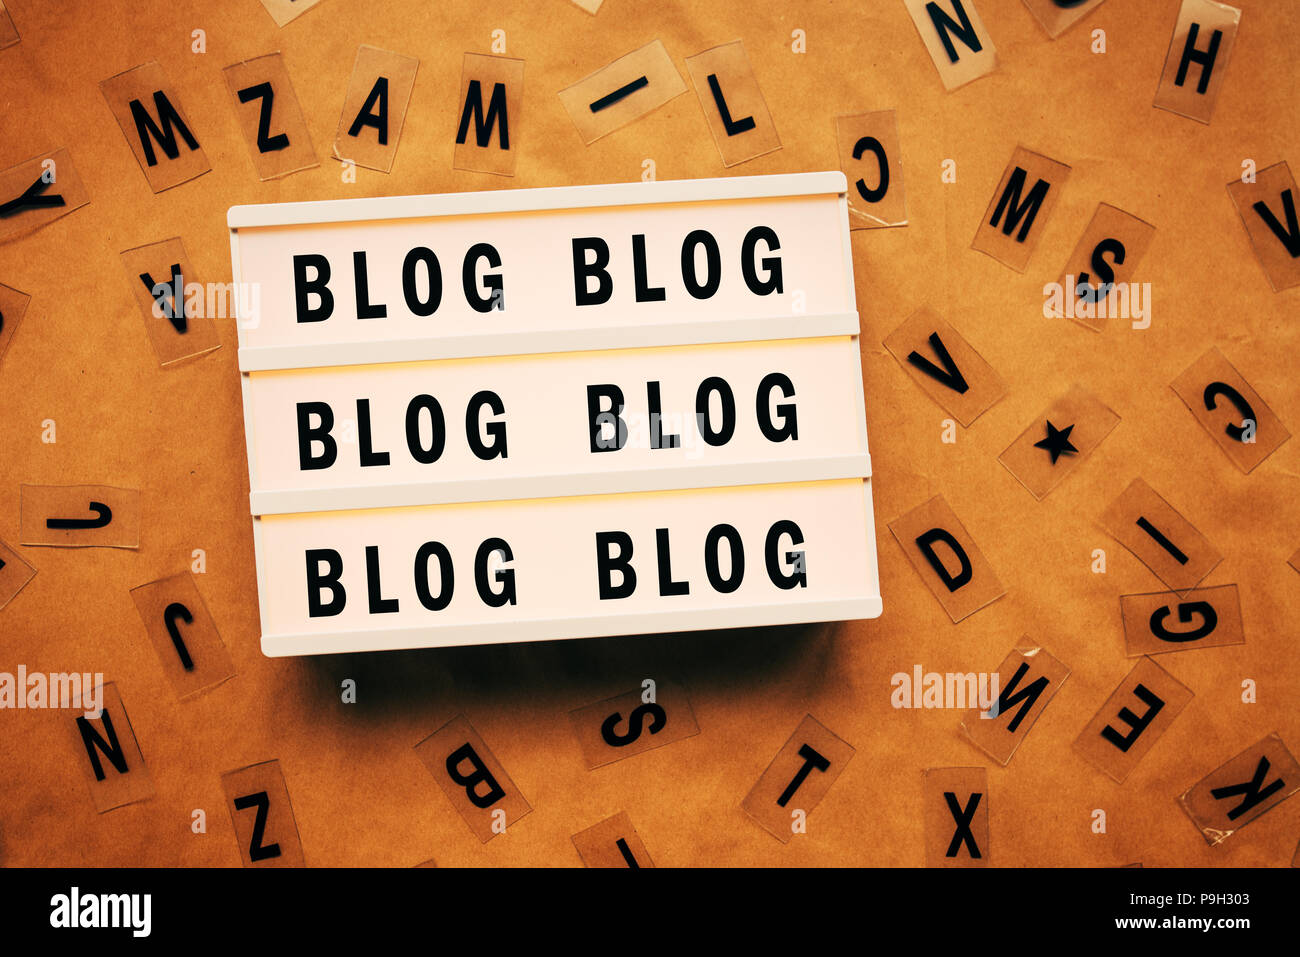 Blog and blogging concept with repeating word on lightbox Stock Photo